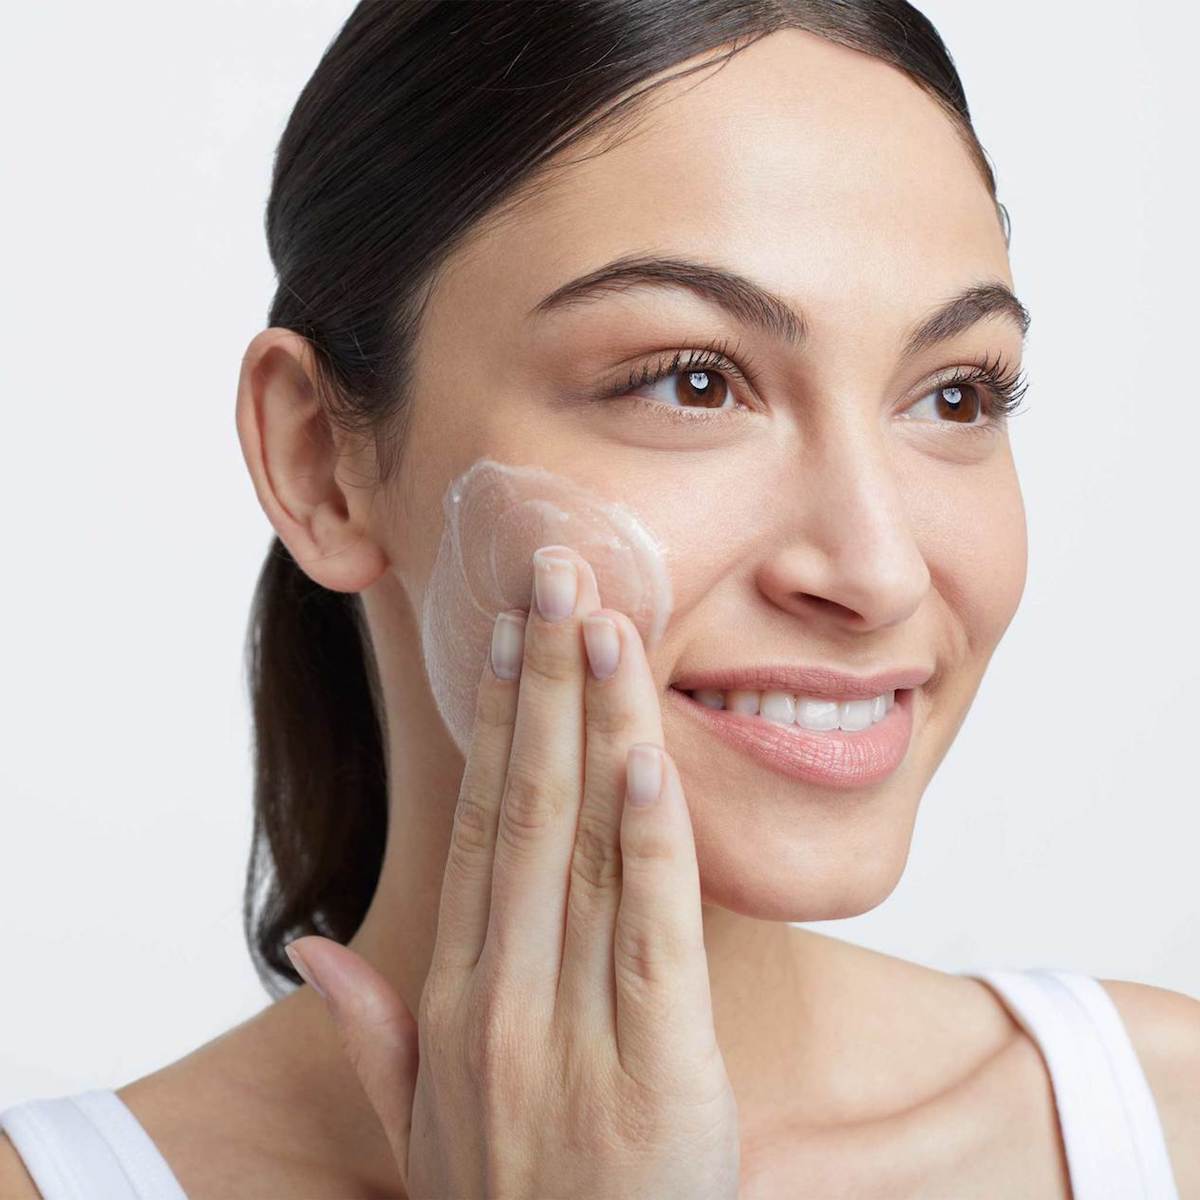 24 Beauty Essentials For Glowing Skin